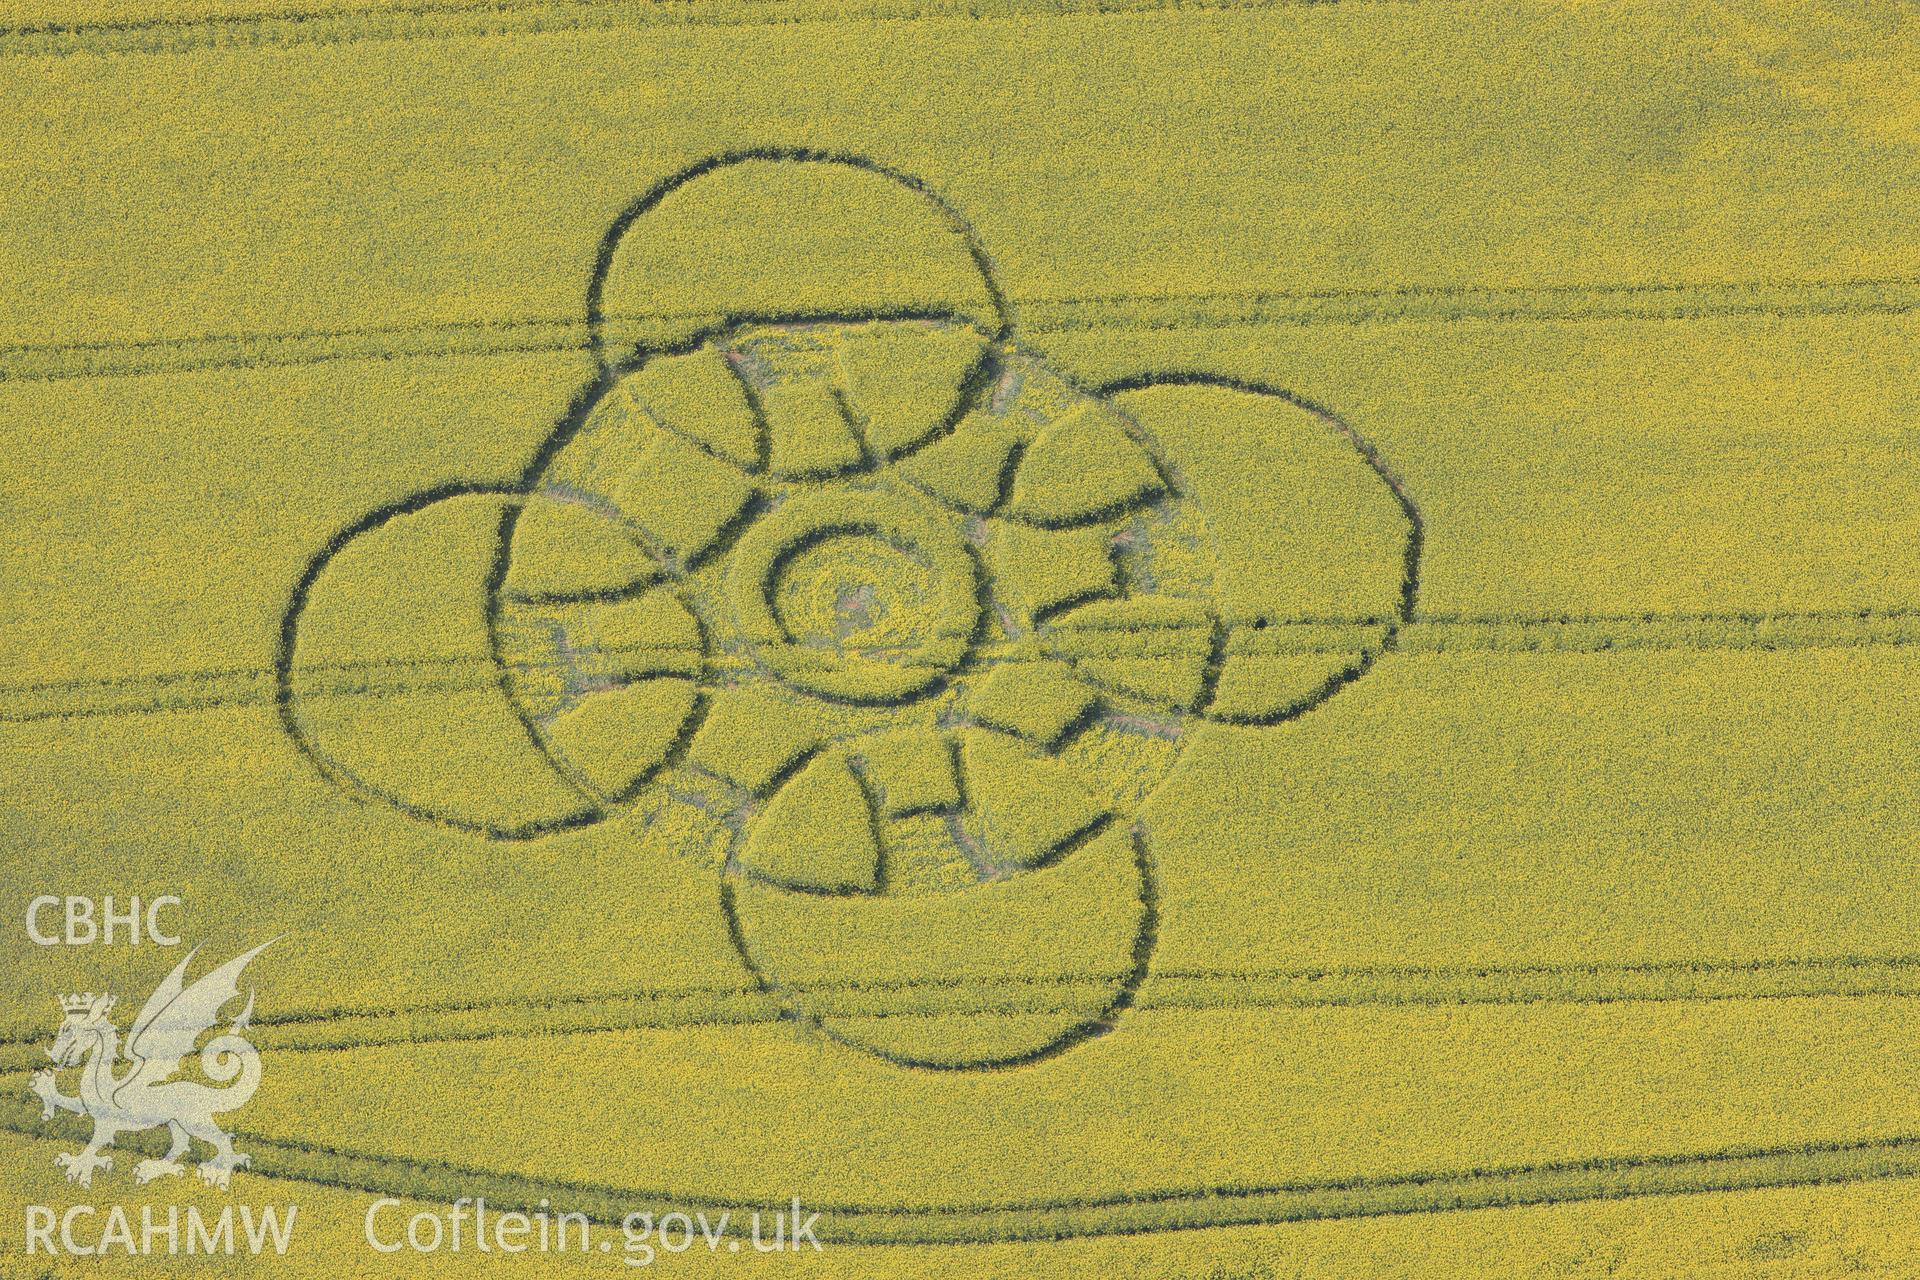 RCAHMW colour oblique photograph of Innage, Chepstow, modern crop circle. Taken by Toby Driver on 26/04/2011.